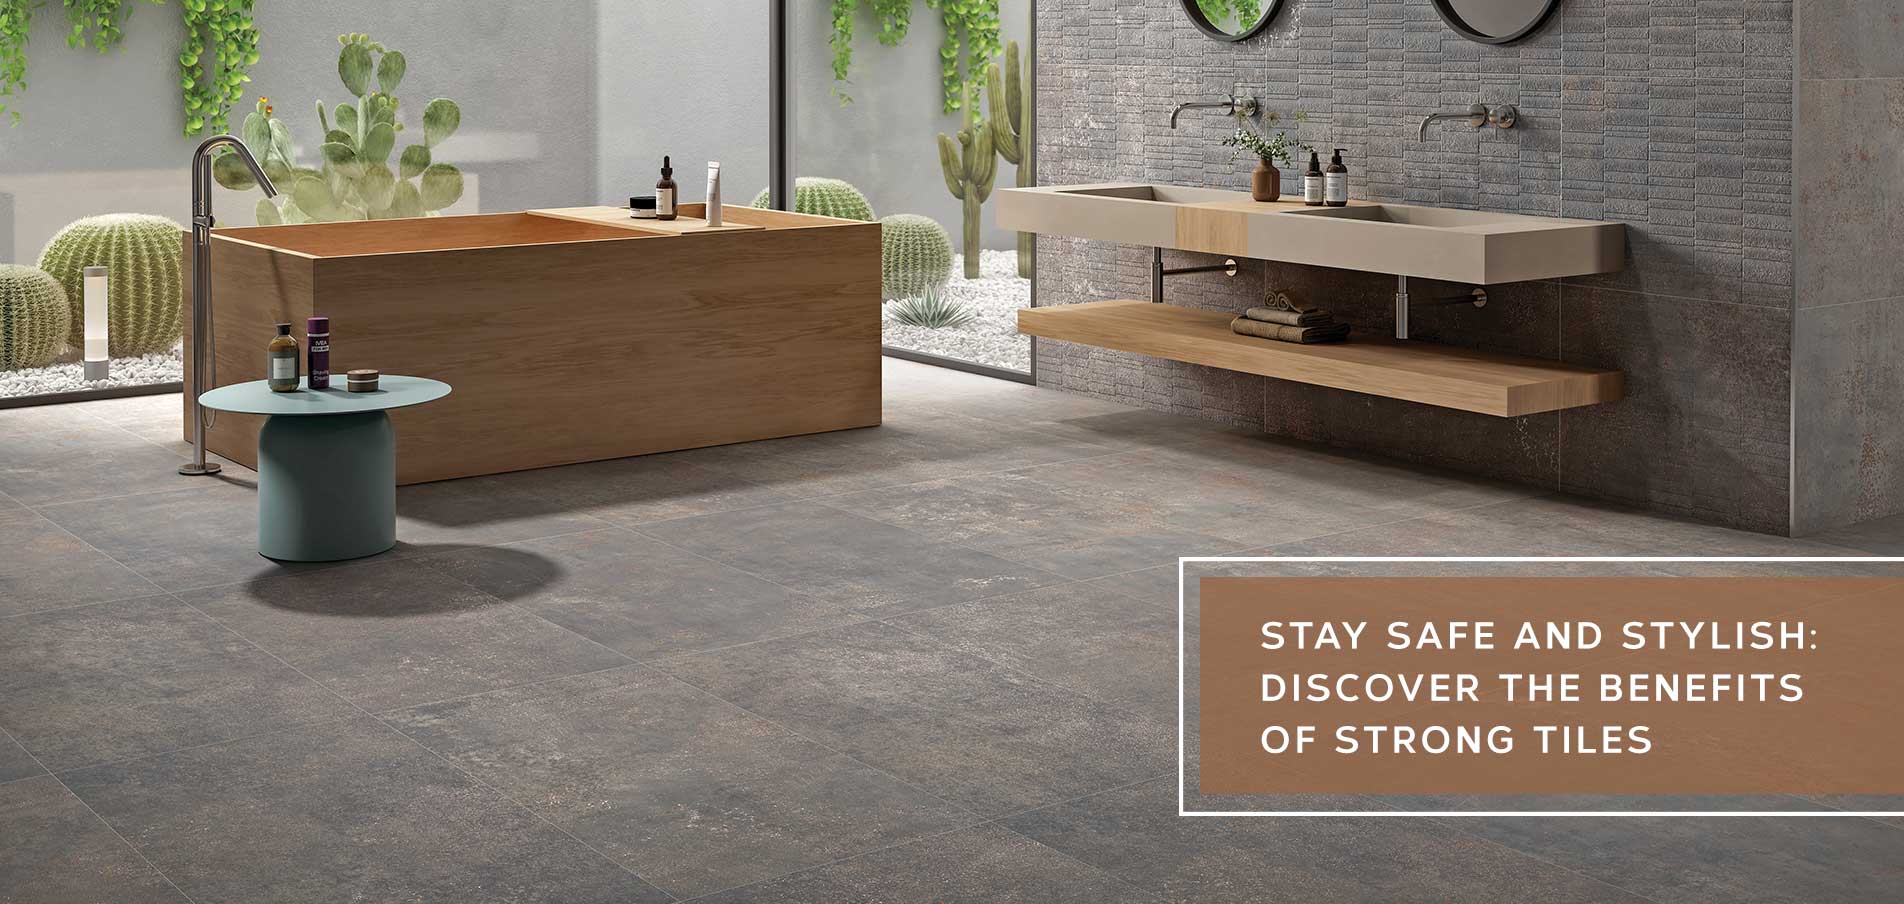 Stay Safe And Stylish Discover The Benefits Of Strong Tiles